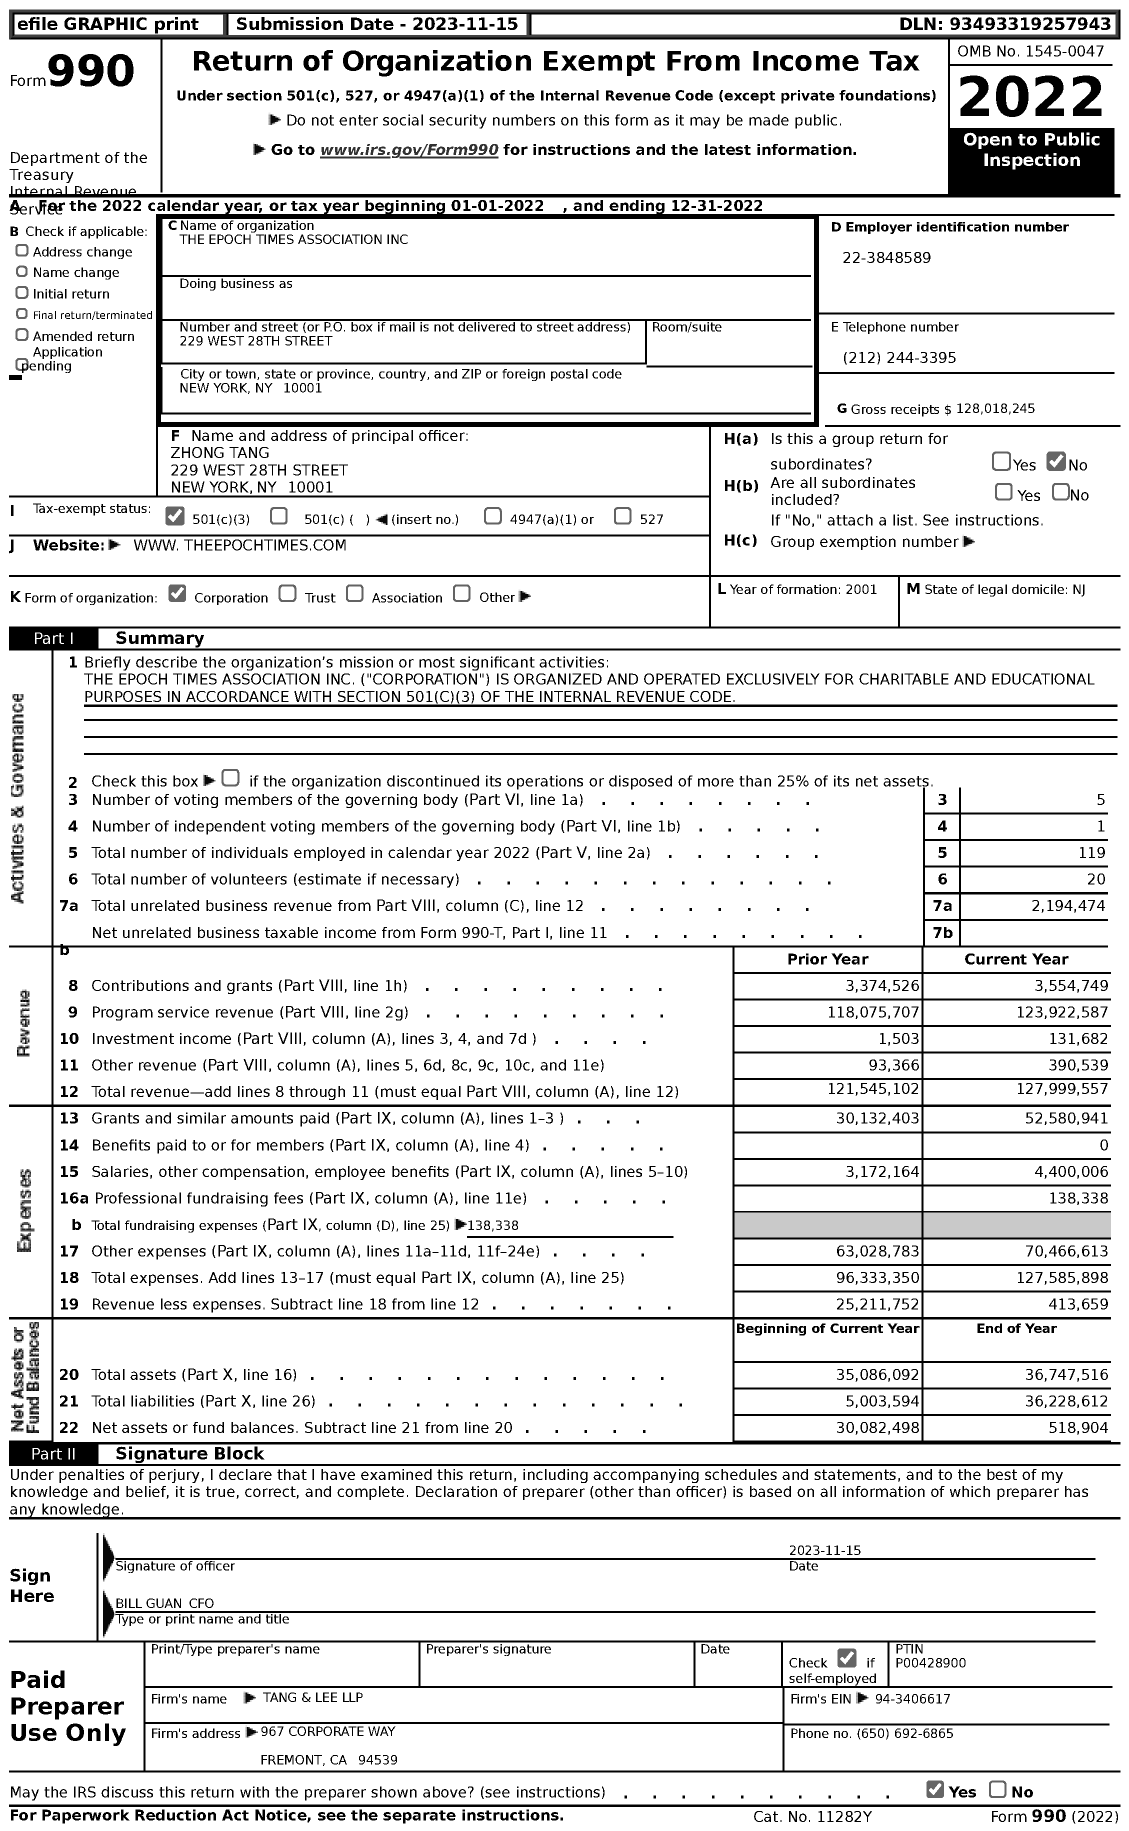 Image of first page of 2022 Form 990 for Epoch Times